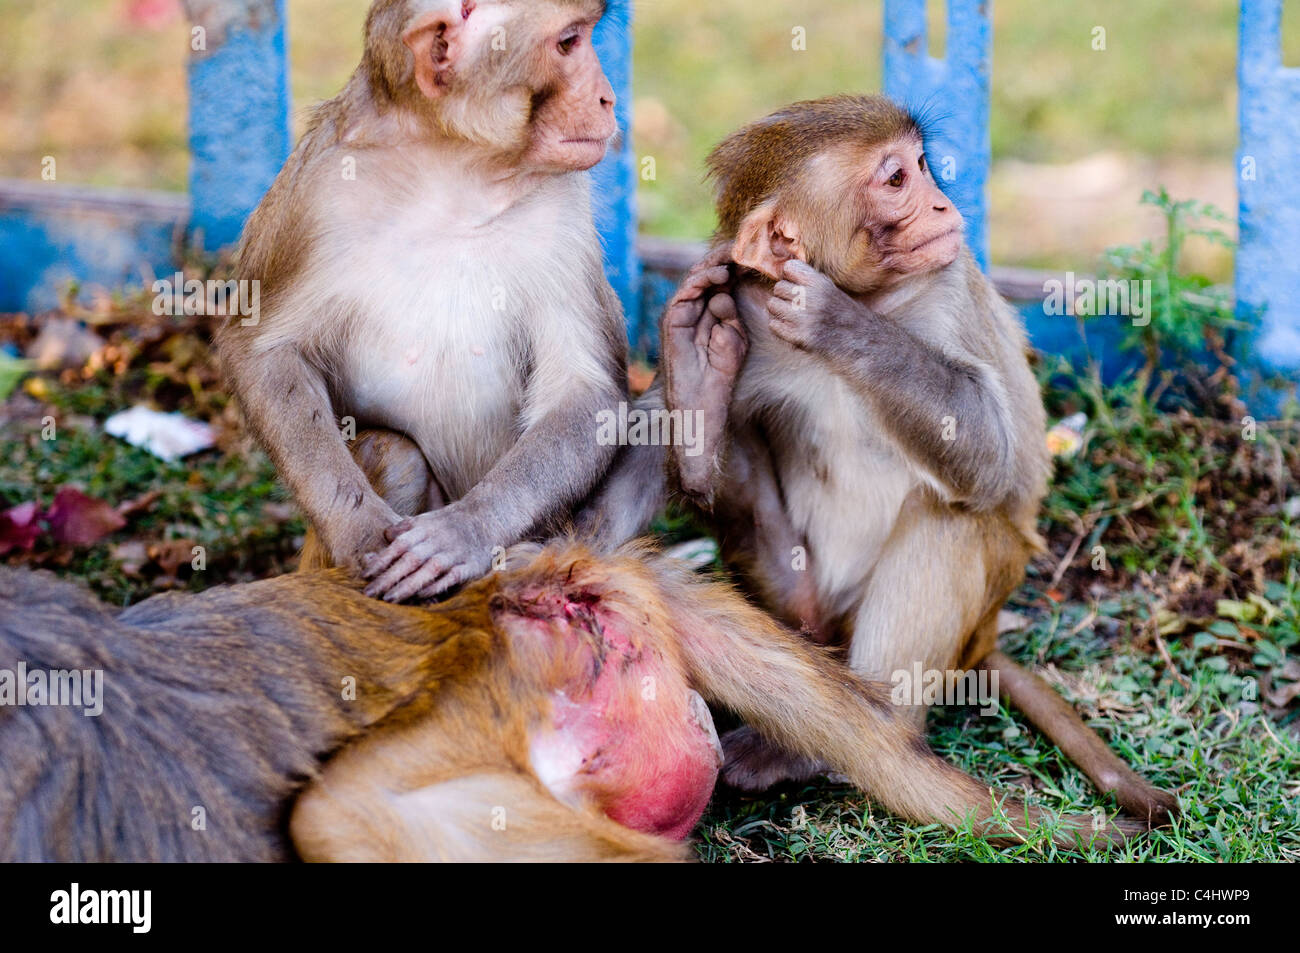 Carino Indian scimmie macaco in Ayodhya, India. Foto Stock